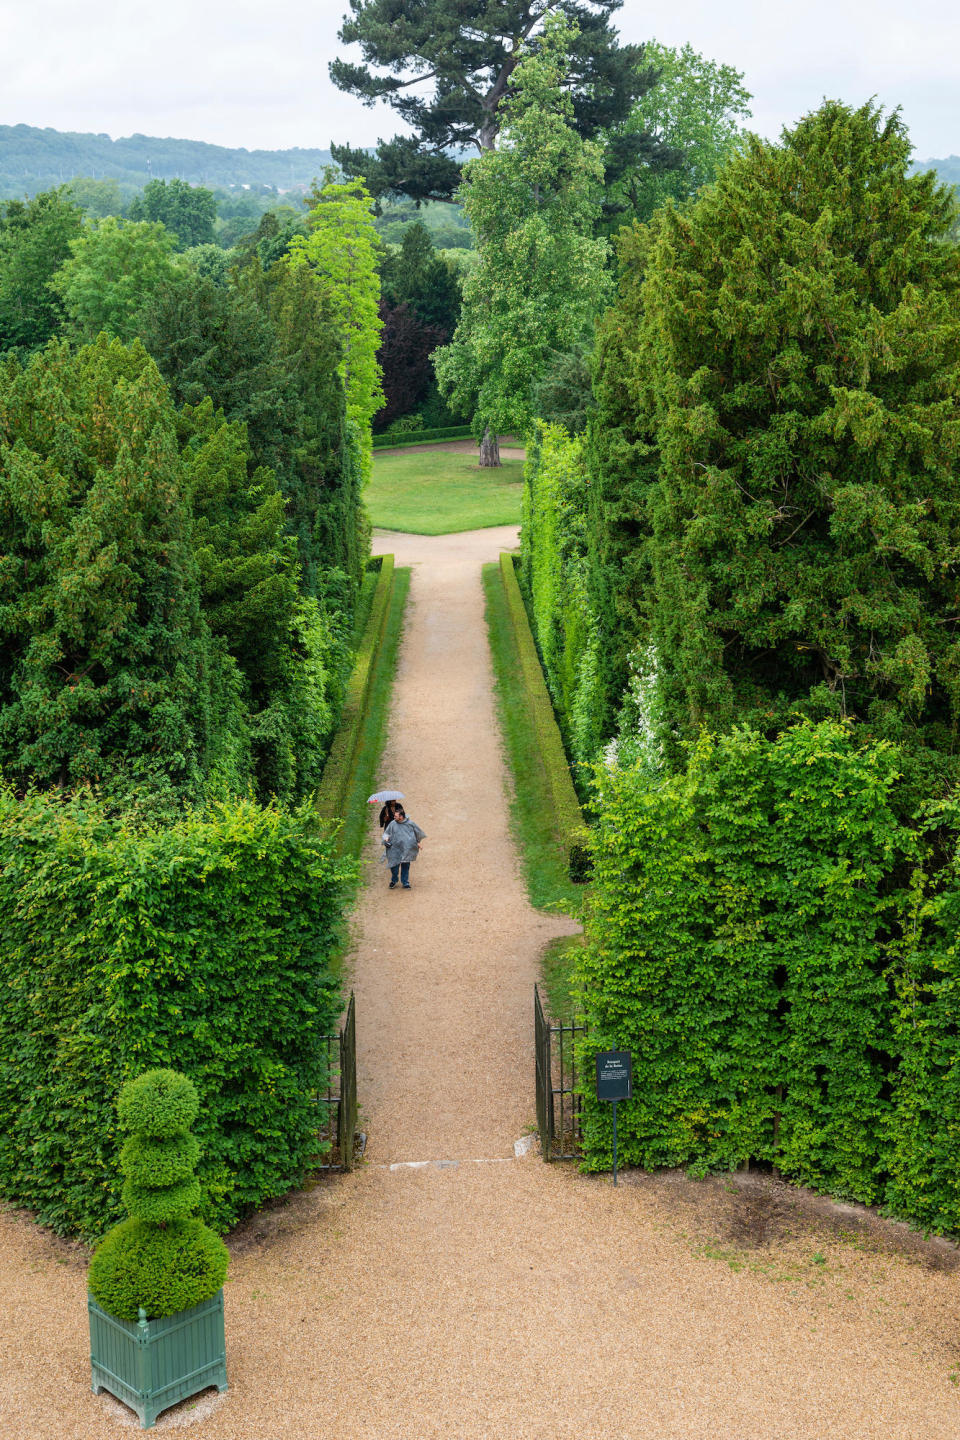 The path leading to the Queen's Grove before the renovations began.